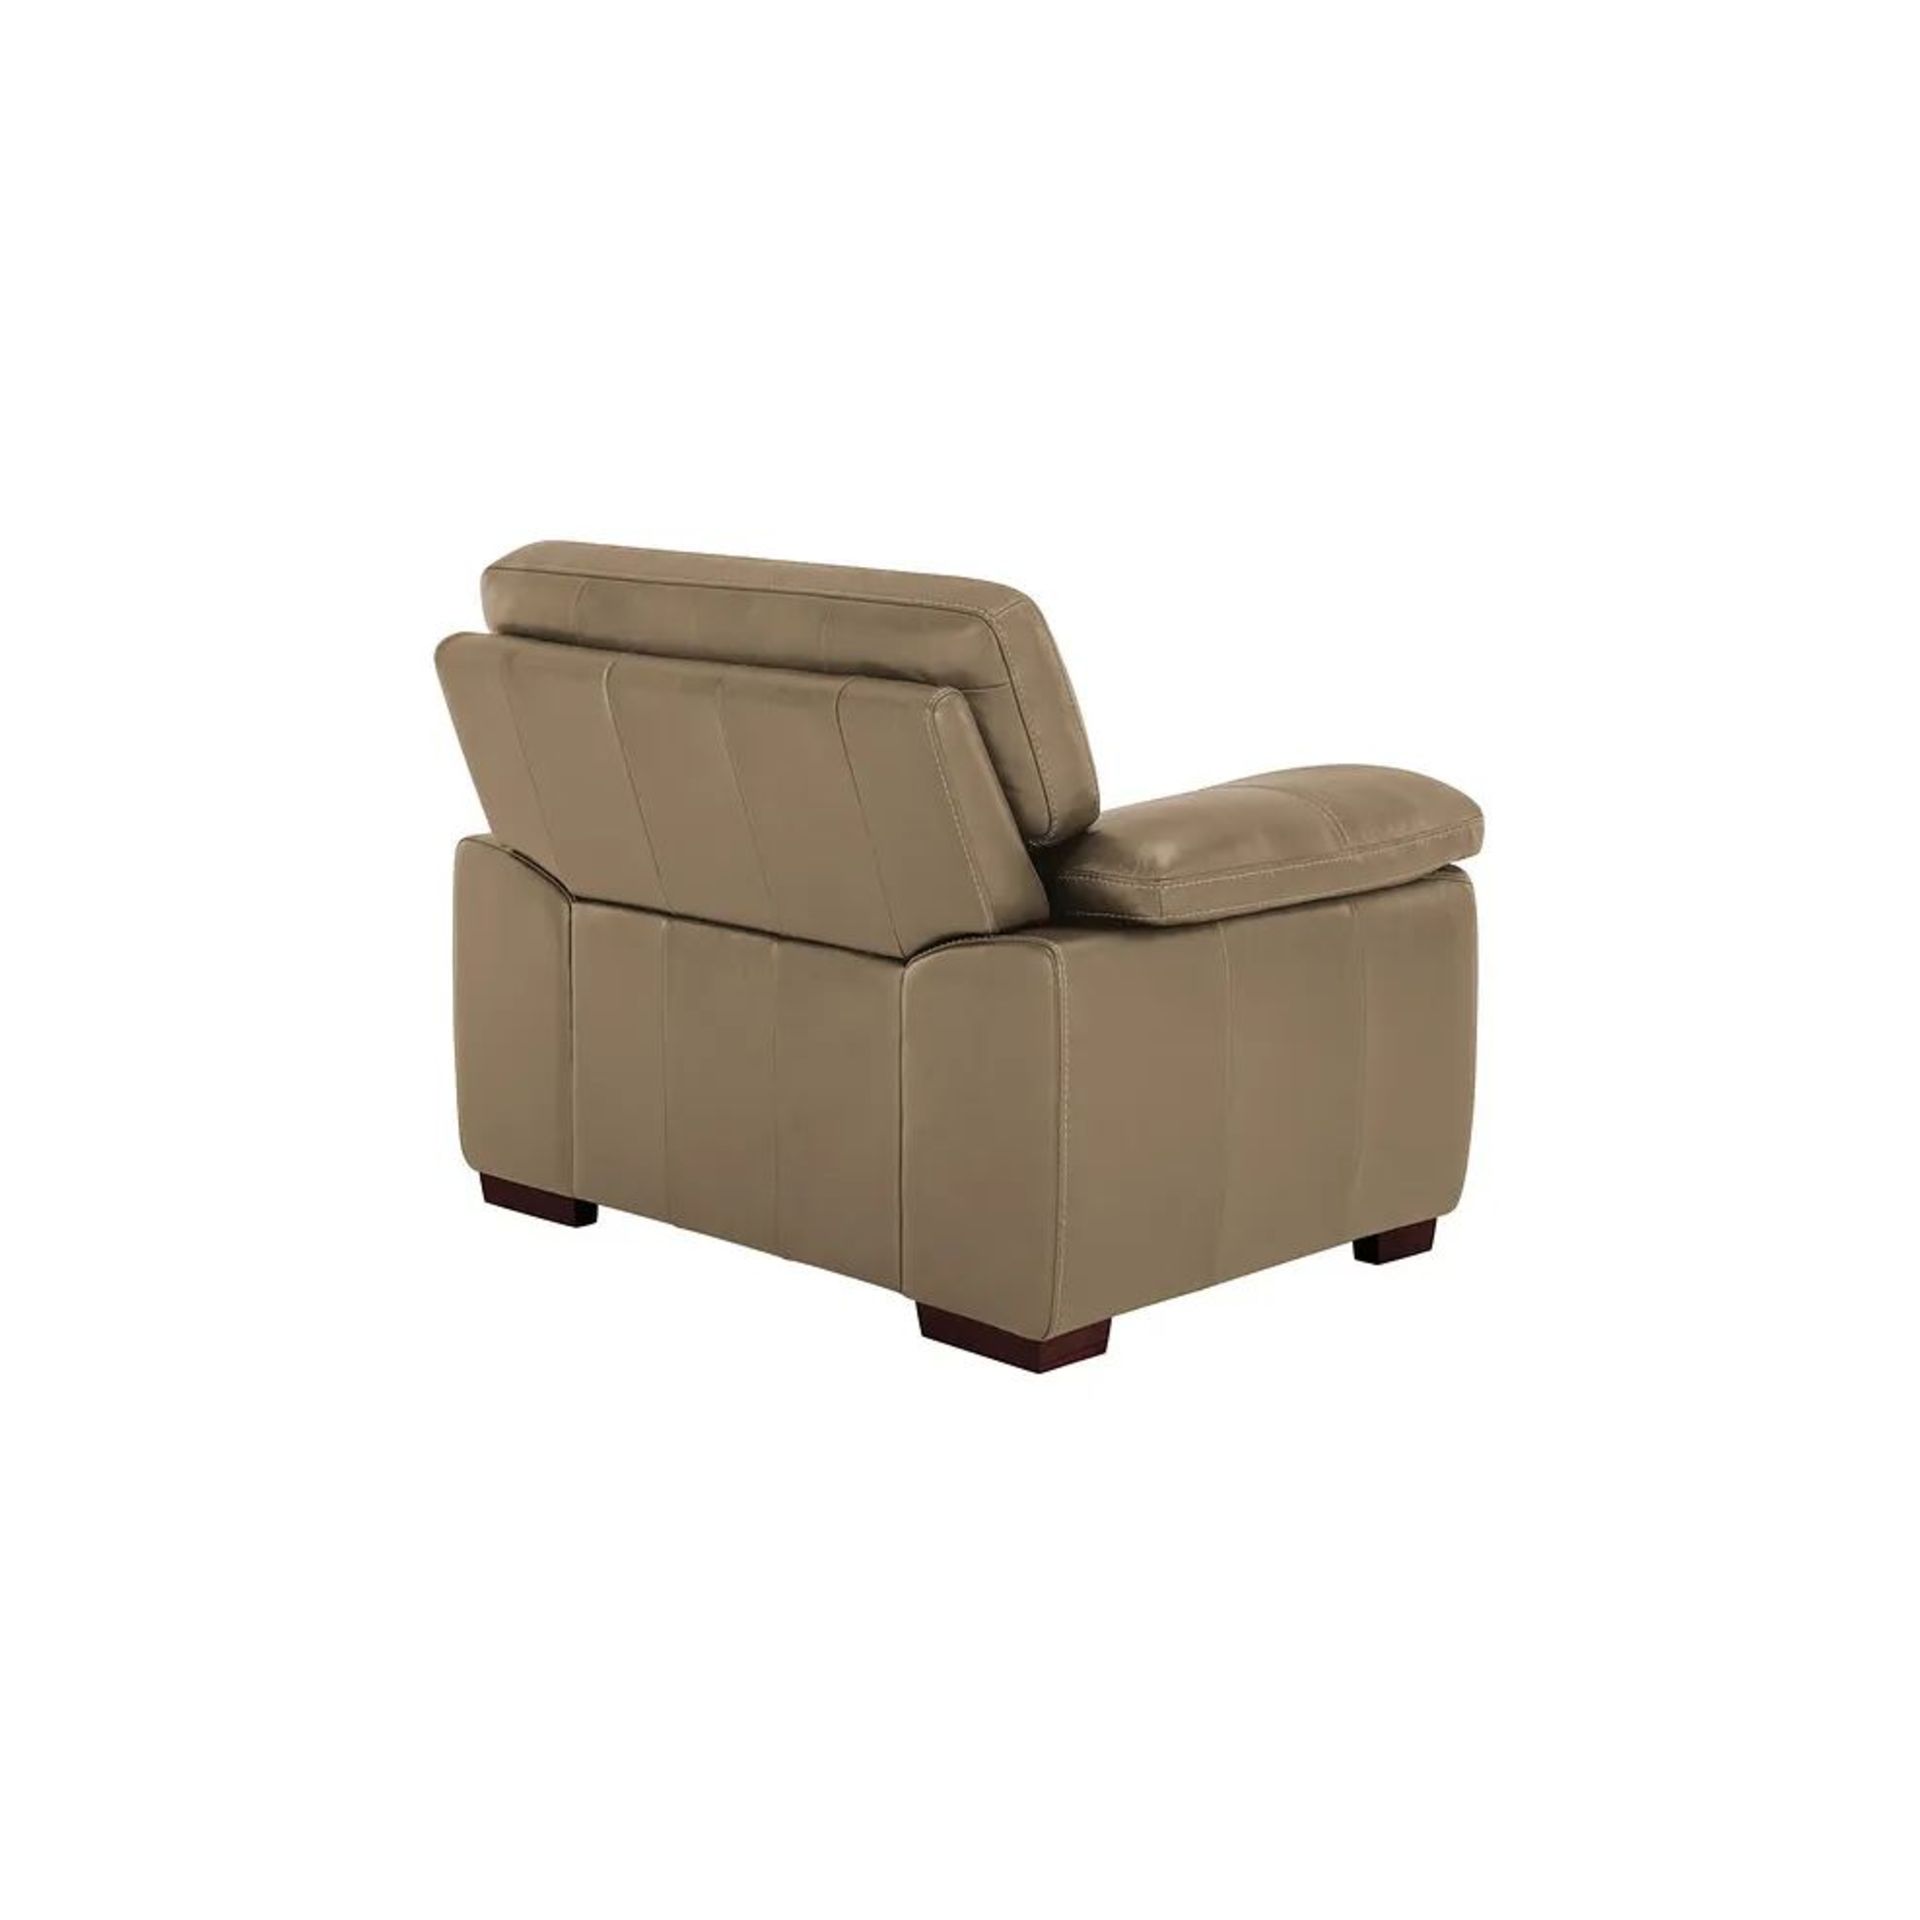 BRAND NEW ARLINGTON Armchair - BEIGE LEATHER. RRP £1099. Create a traditional and homely feel in - Bild 3 aus 9